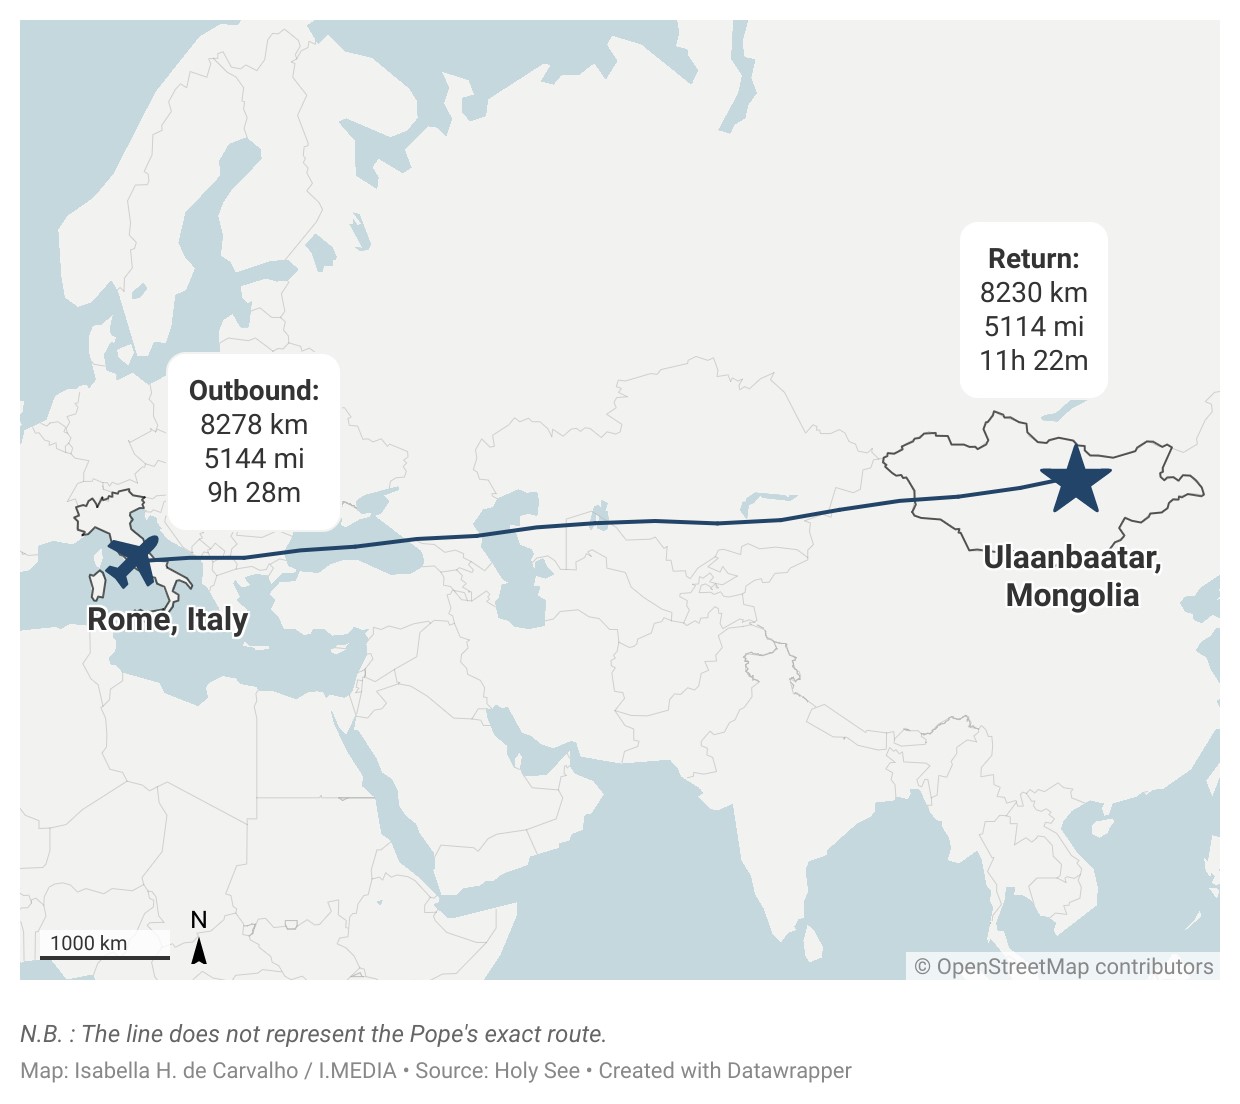 A map showing Pope Francis' journey from Rome, Italy to Ulaanbaatar, Mongolia